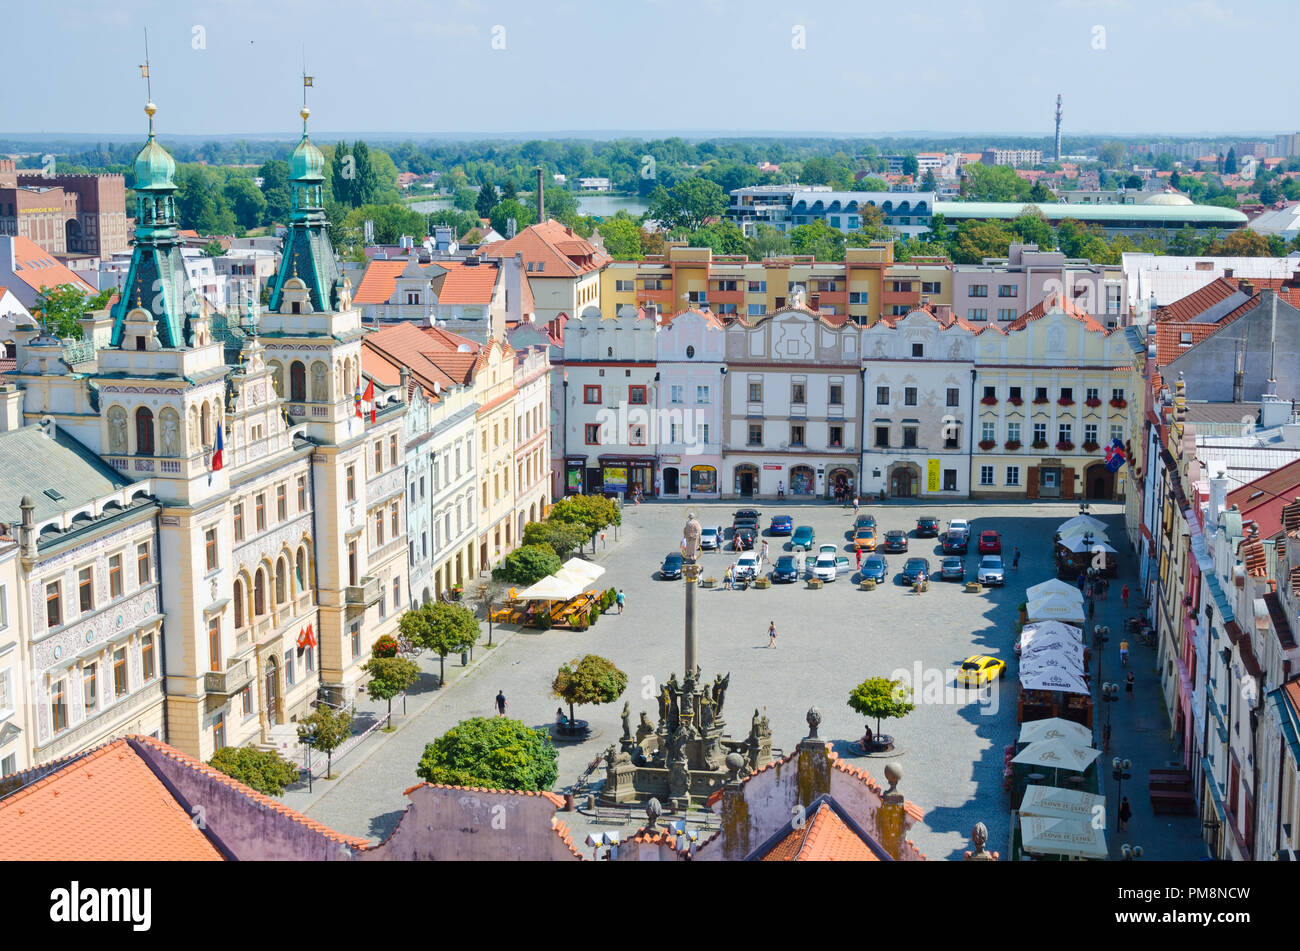 PARDUBICE, CZECH REPUBLIC. 1st August 2018. Summer in the busy main square and Town Hall of Pardubice, a city that is becoming a popular tourist spot. Stock Photo